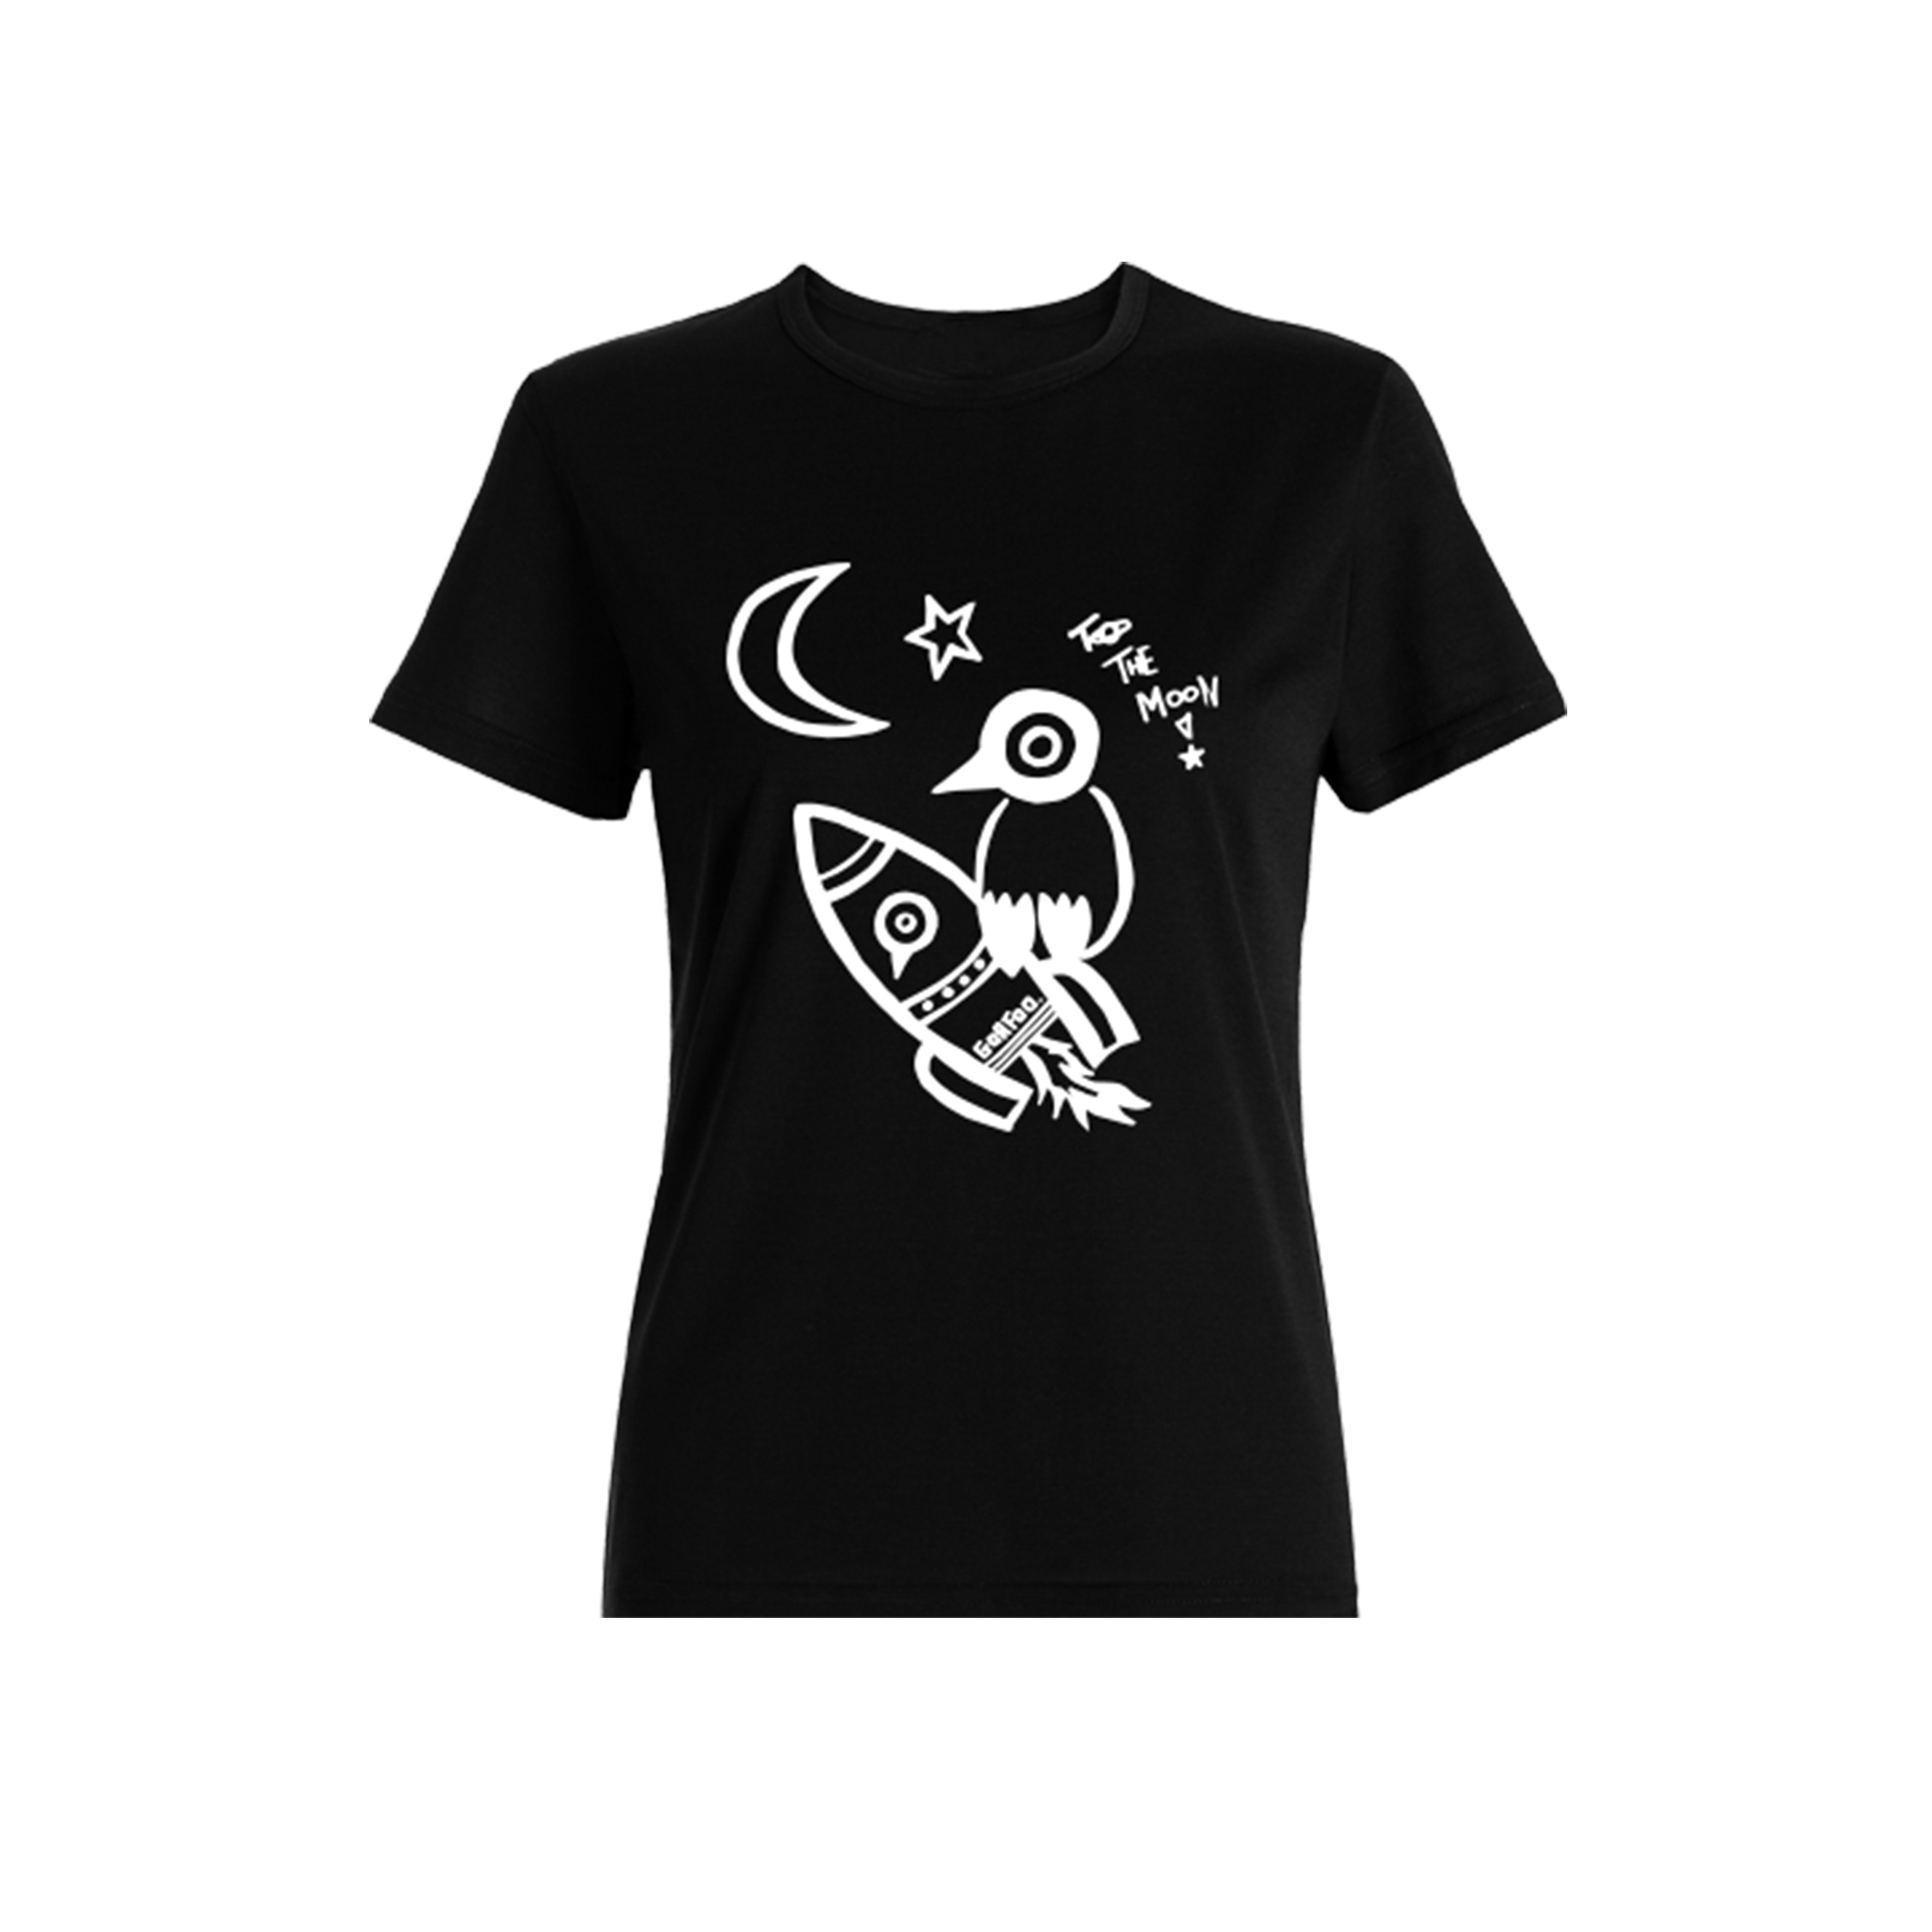 T-shirt femme "To The Moon"